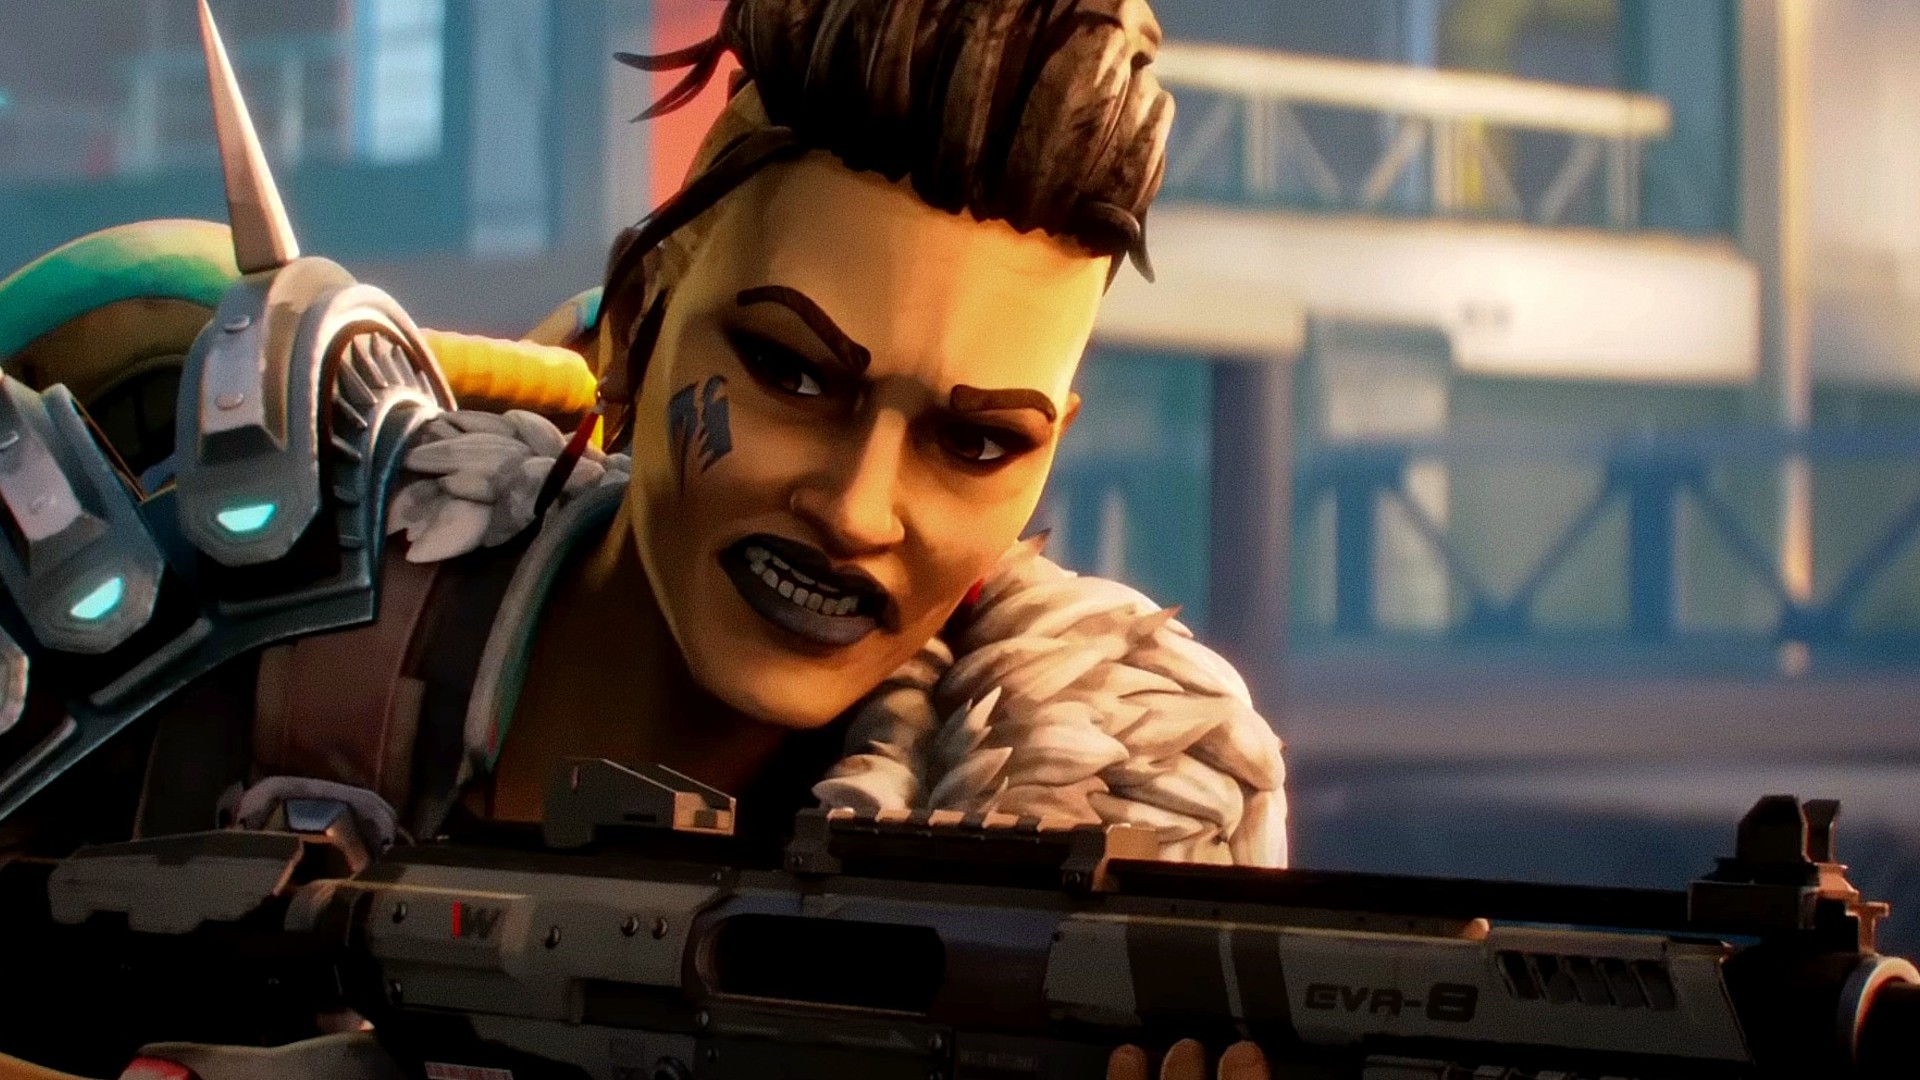 New Apex Legends character Catalyst will be bad news for Bloodhound mains